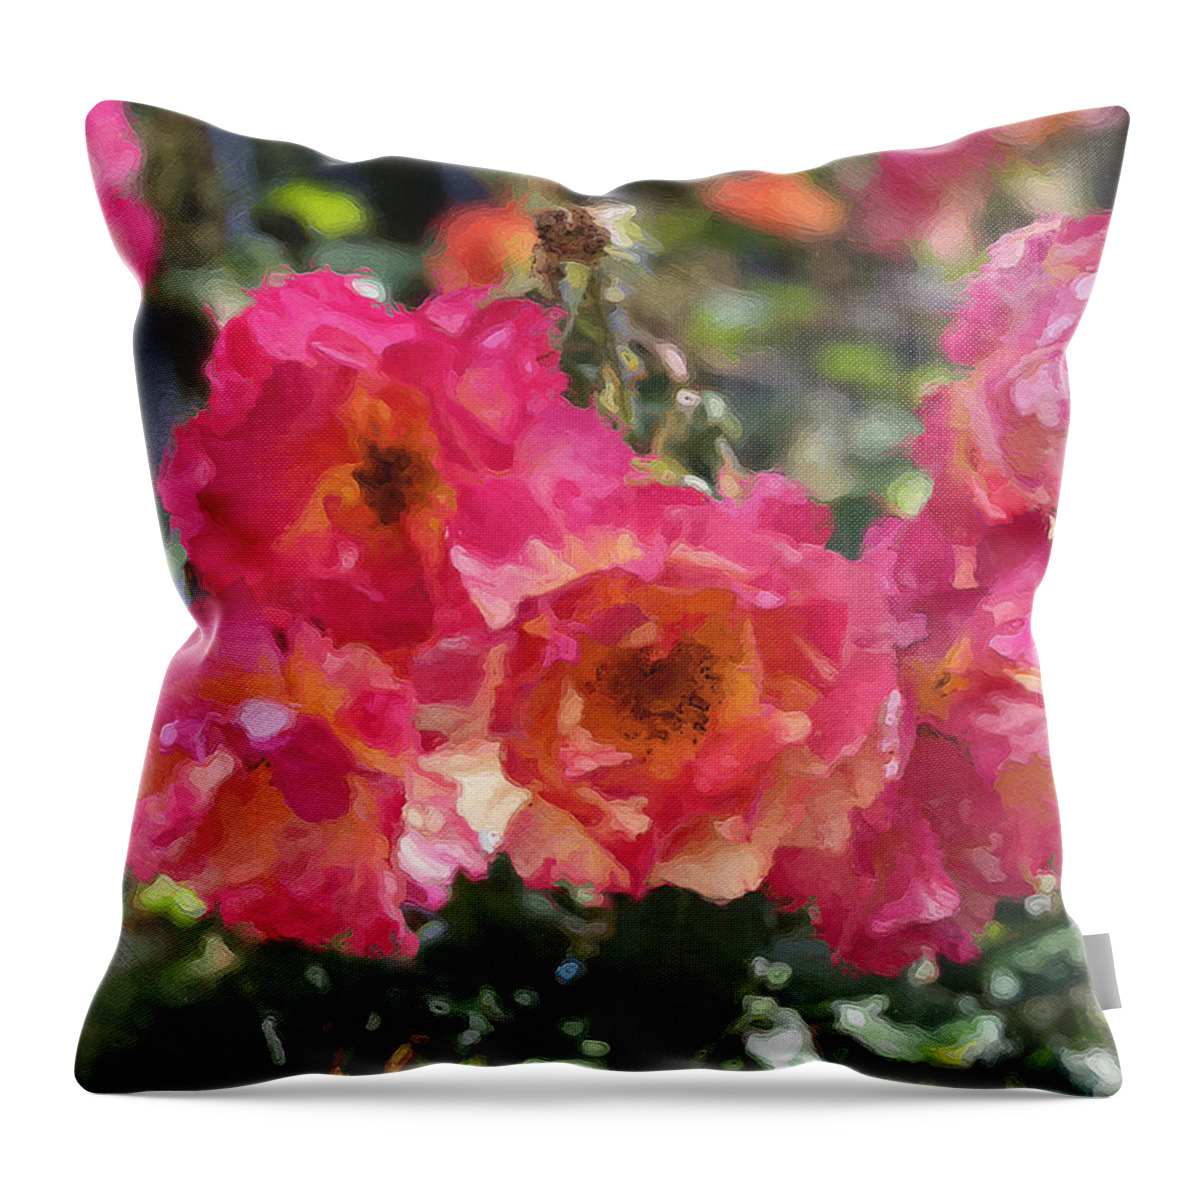 Roses Throw Pillow featuring the photograph Disney Roses Two by Brian Watt